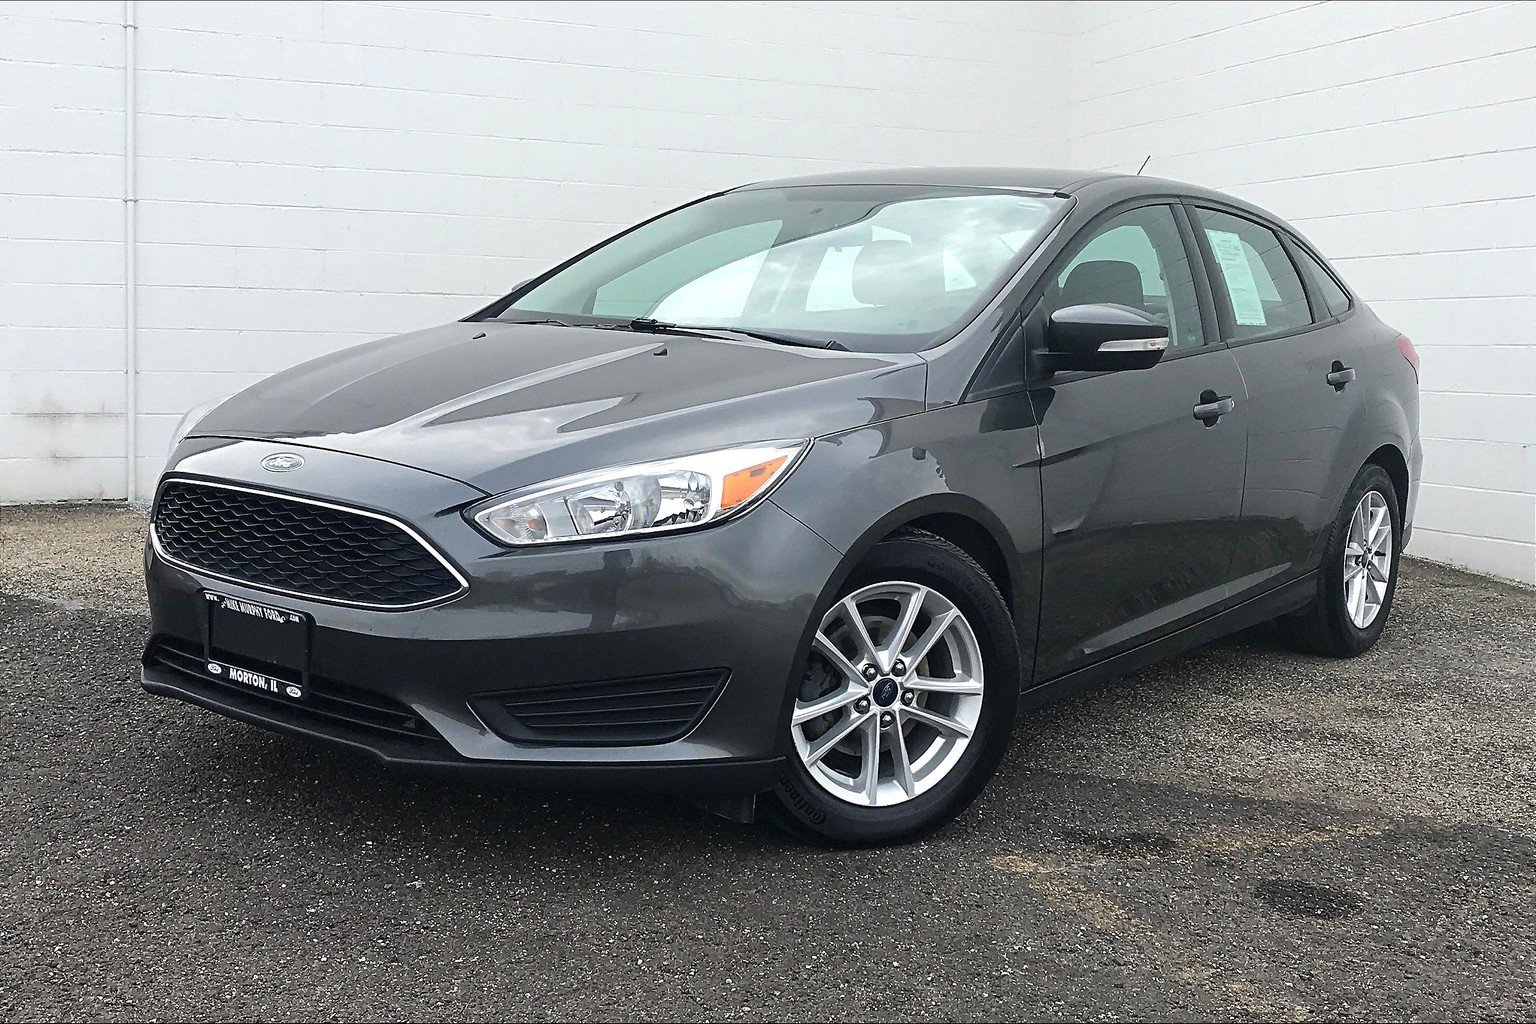 Pre-Owned 2015 Ford Focus SE 4D Sedan in Morton #383152 | Mike Murphy Ford